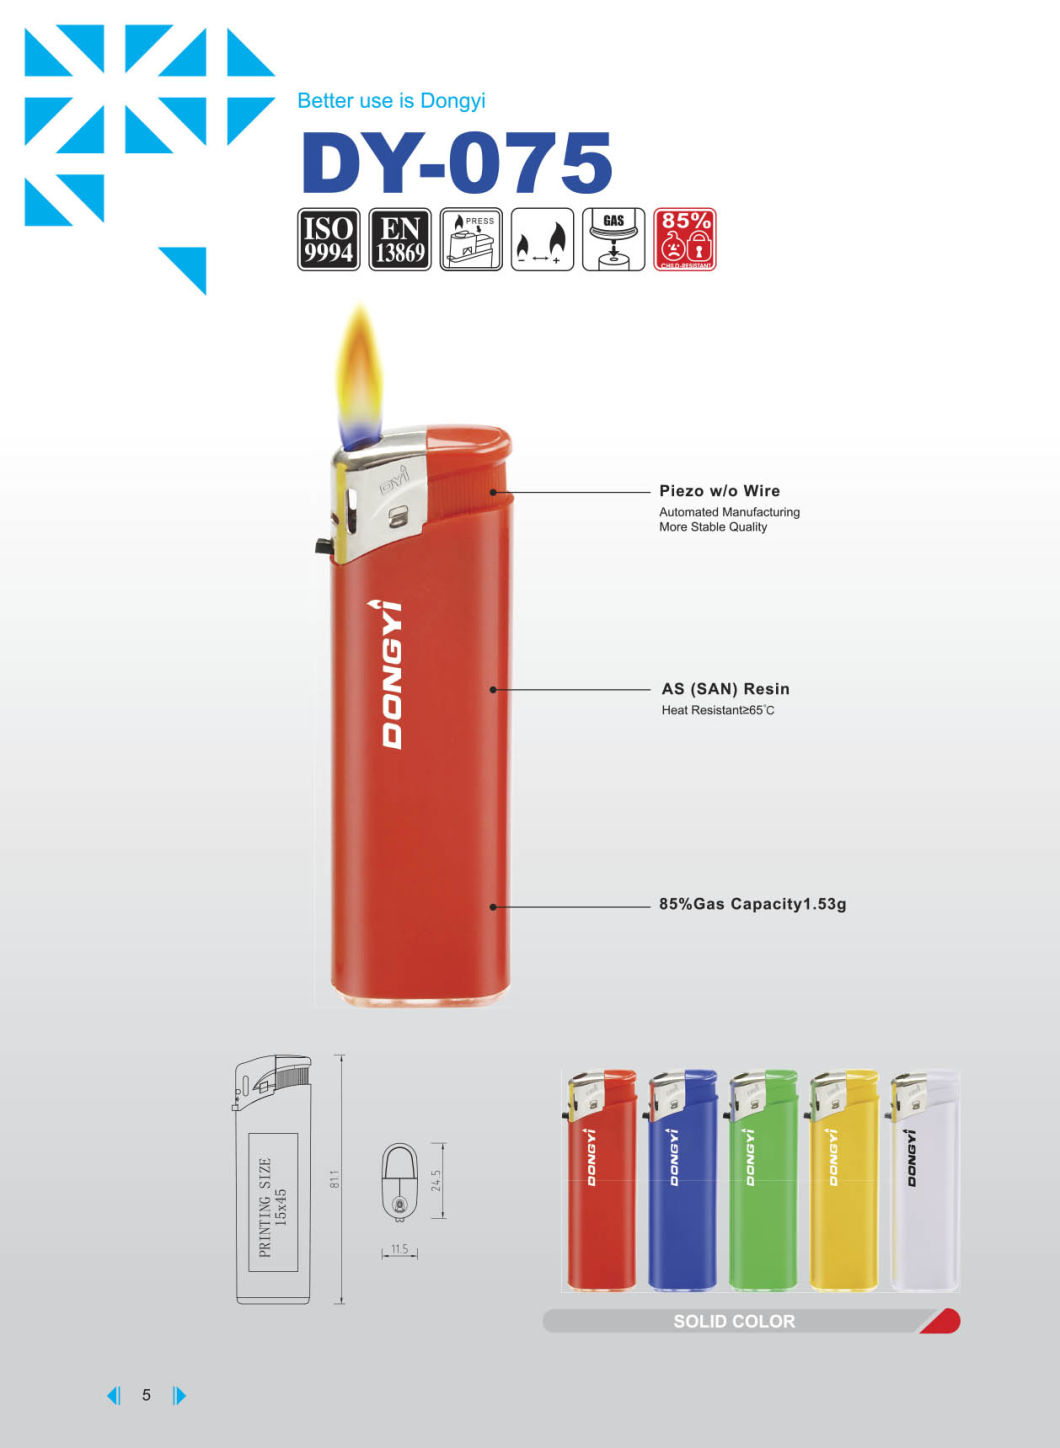 Famous Building Electric Lighter for Candle